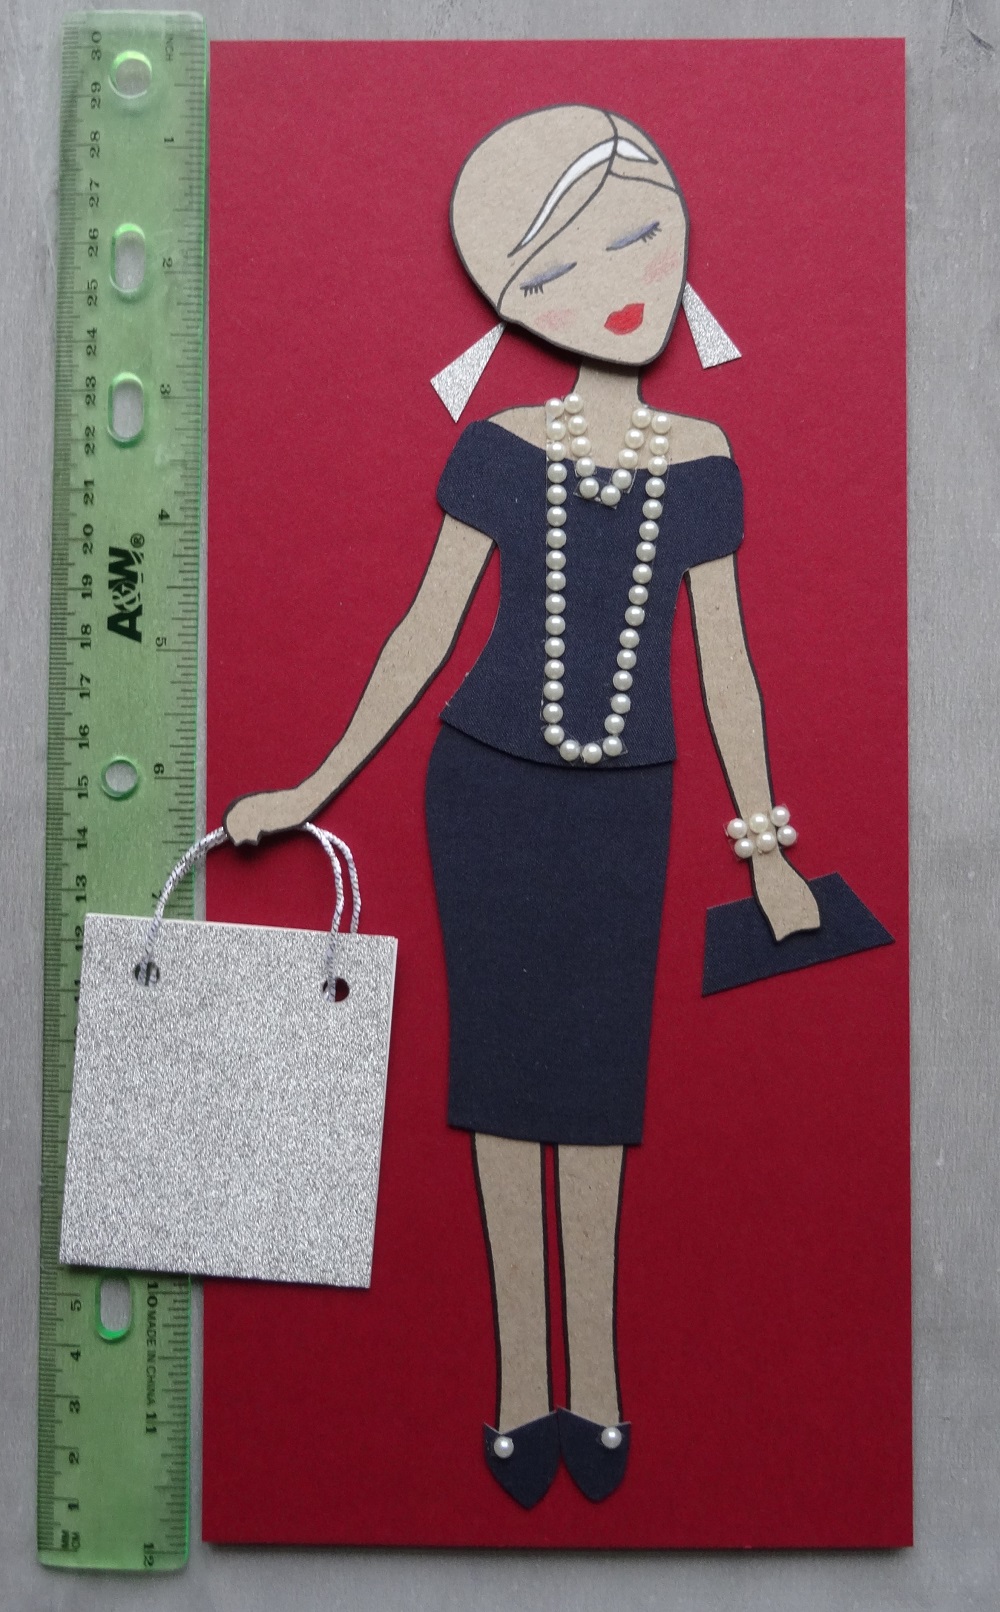 Shopping queen. A greeting card for money gifts.